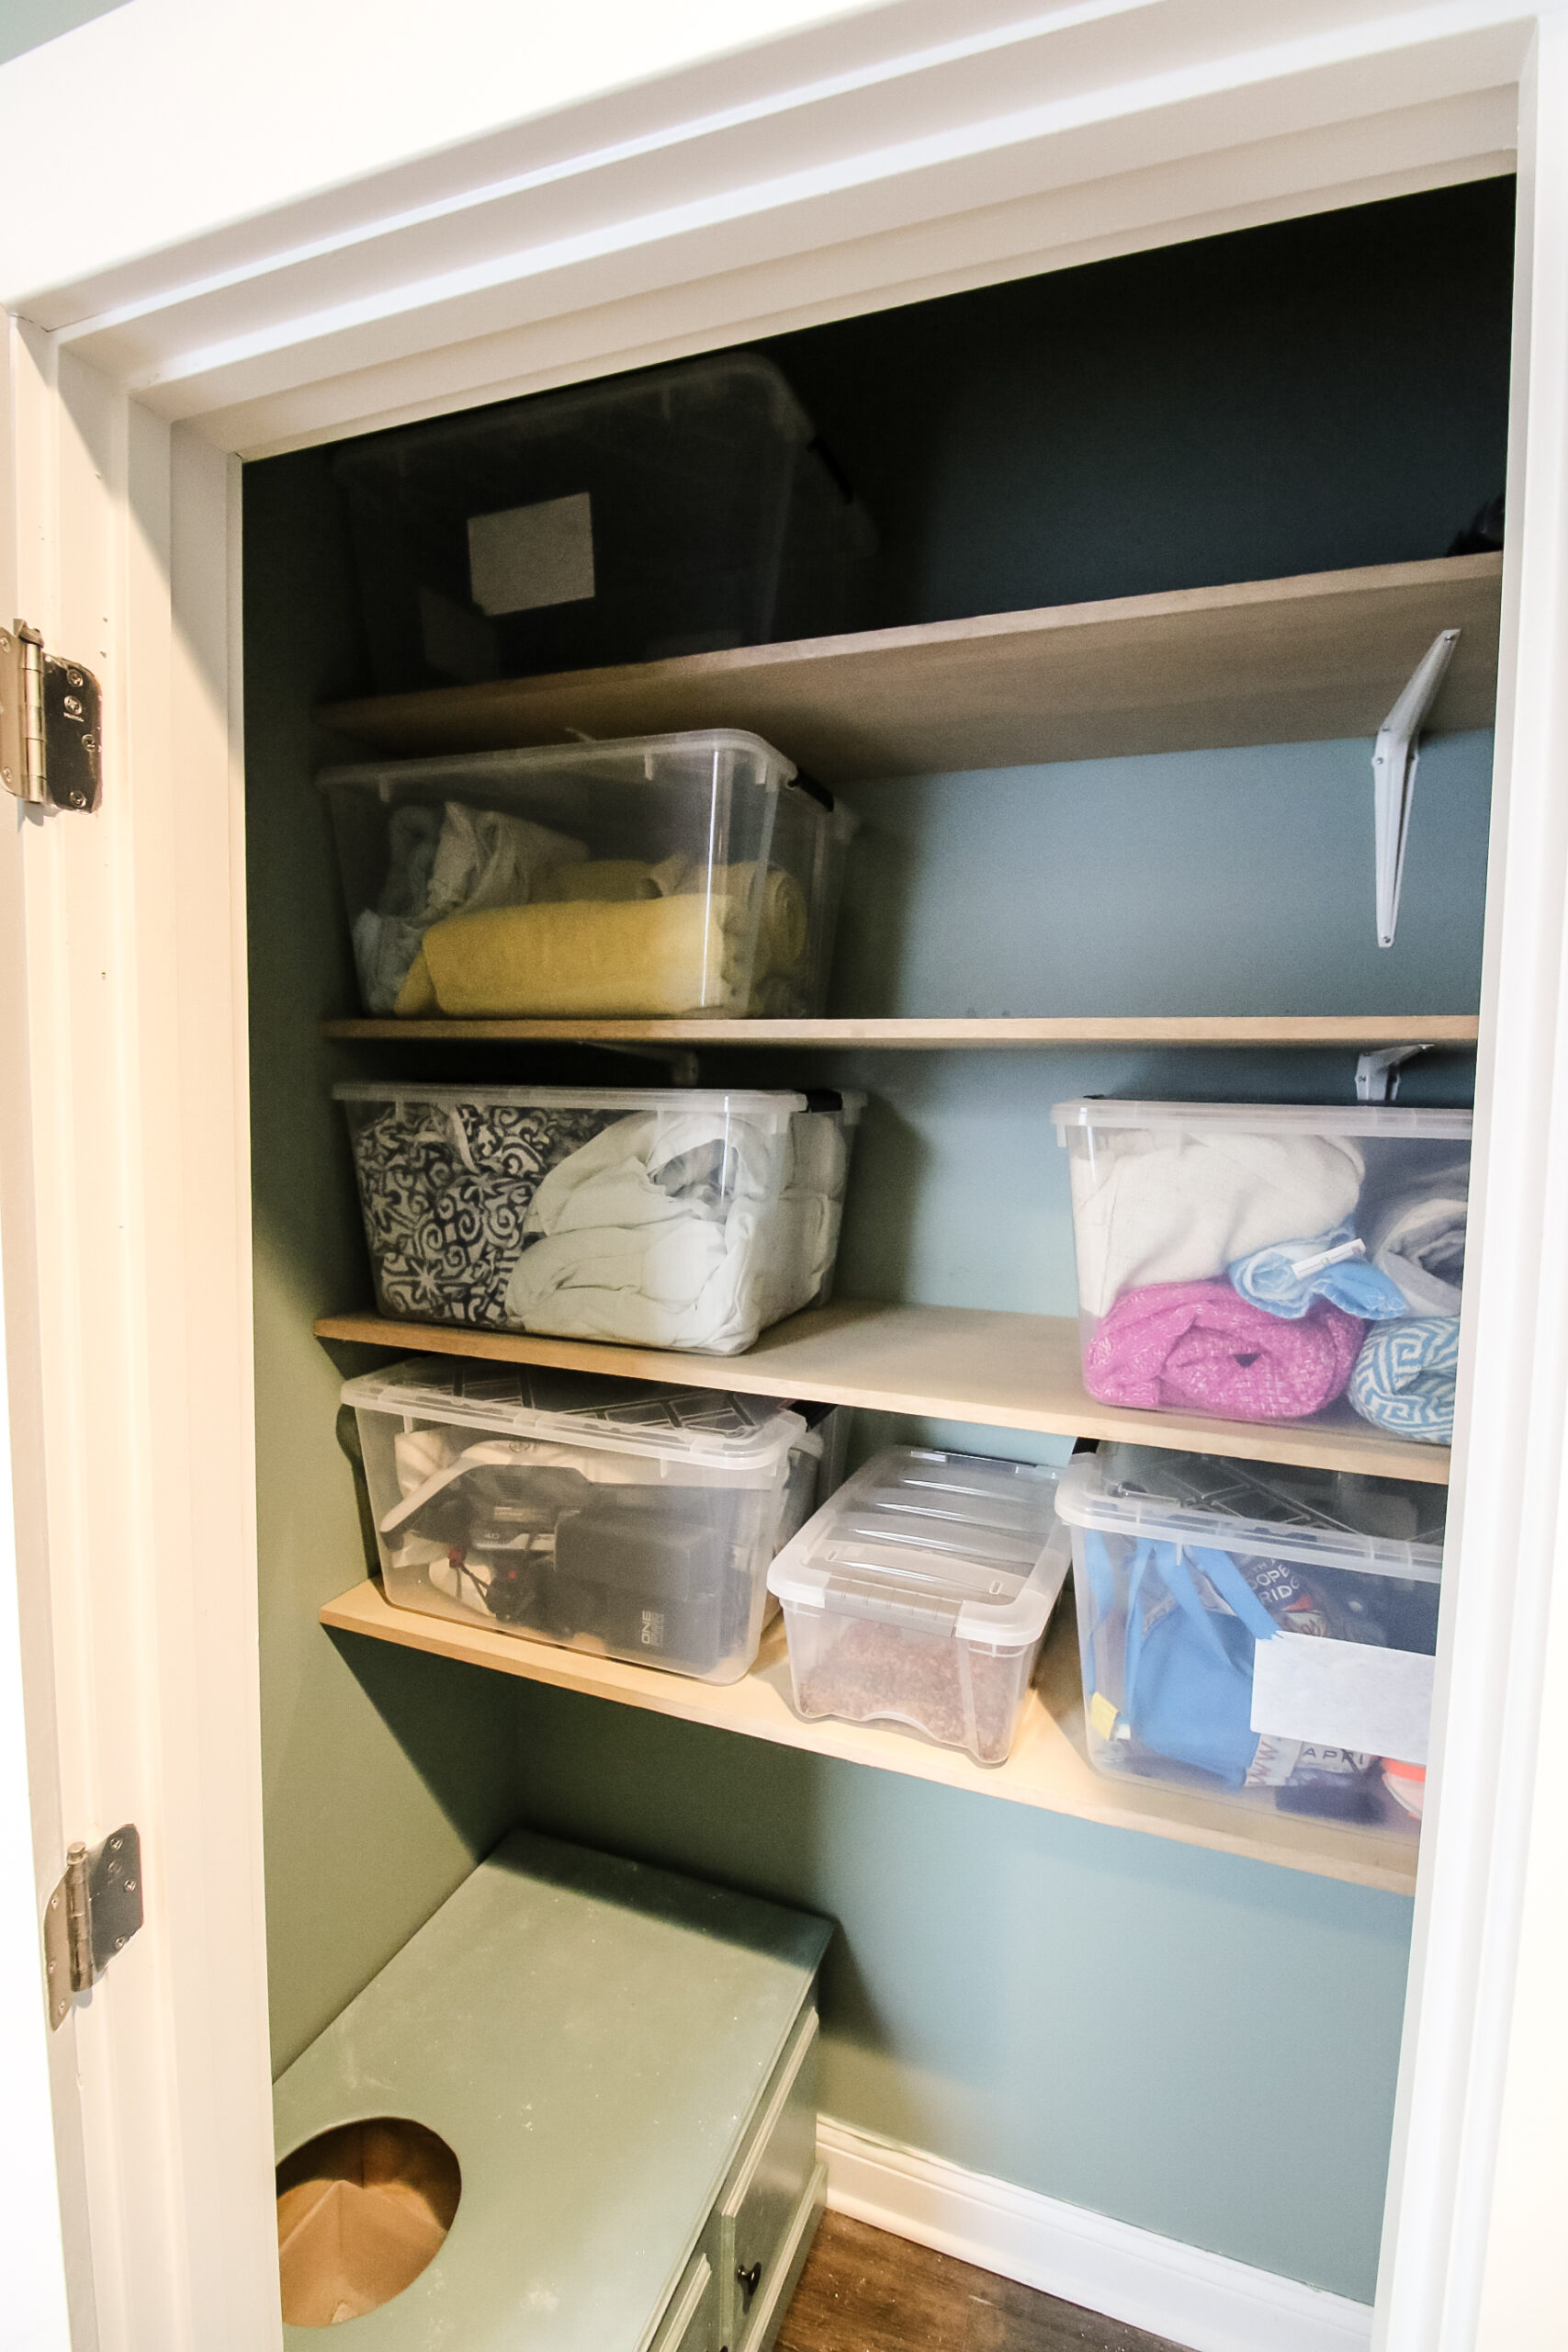 Simple closet shelves you can build in a weekend to get organized!